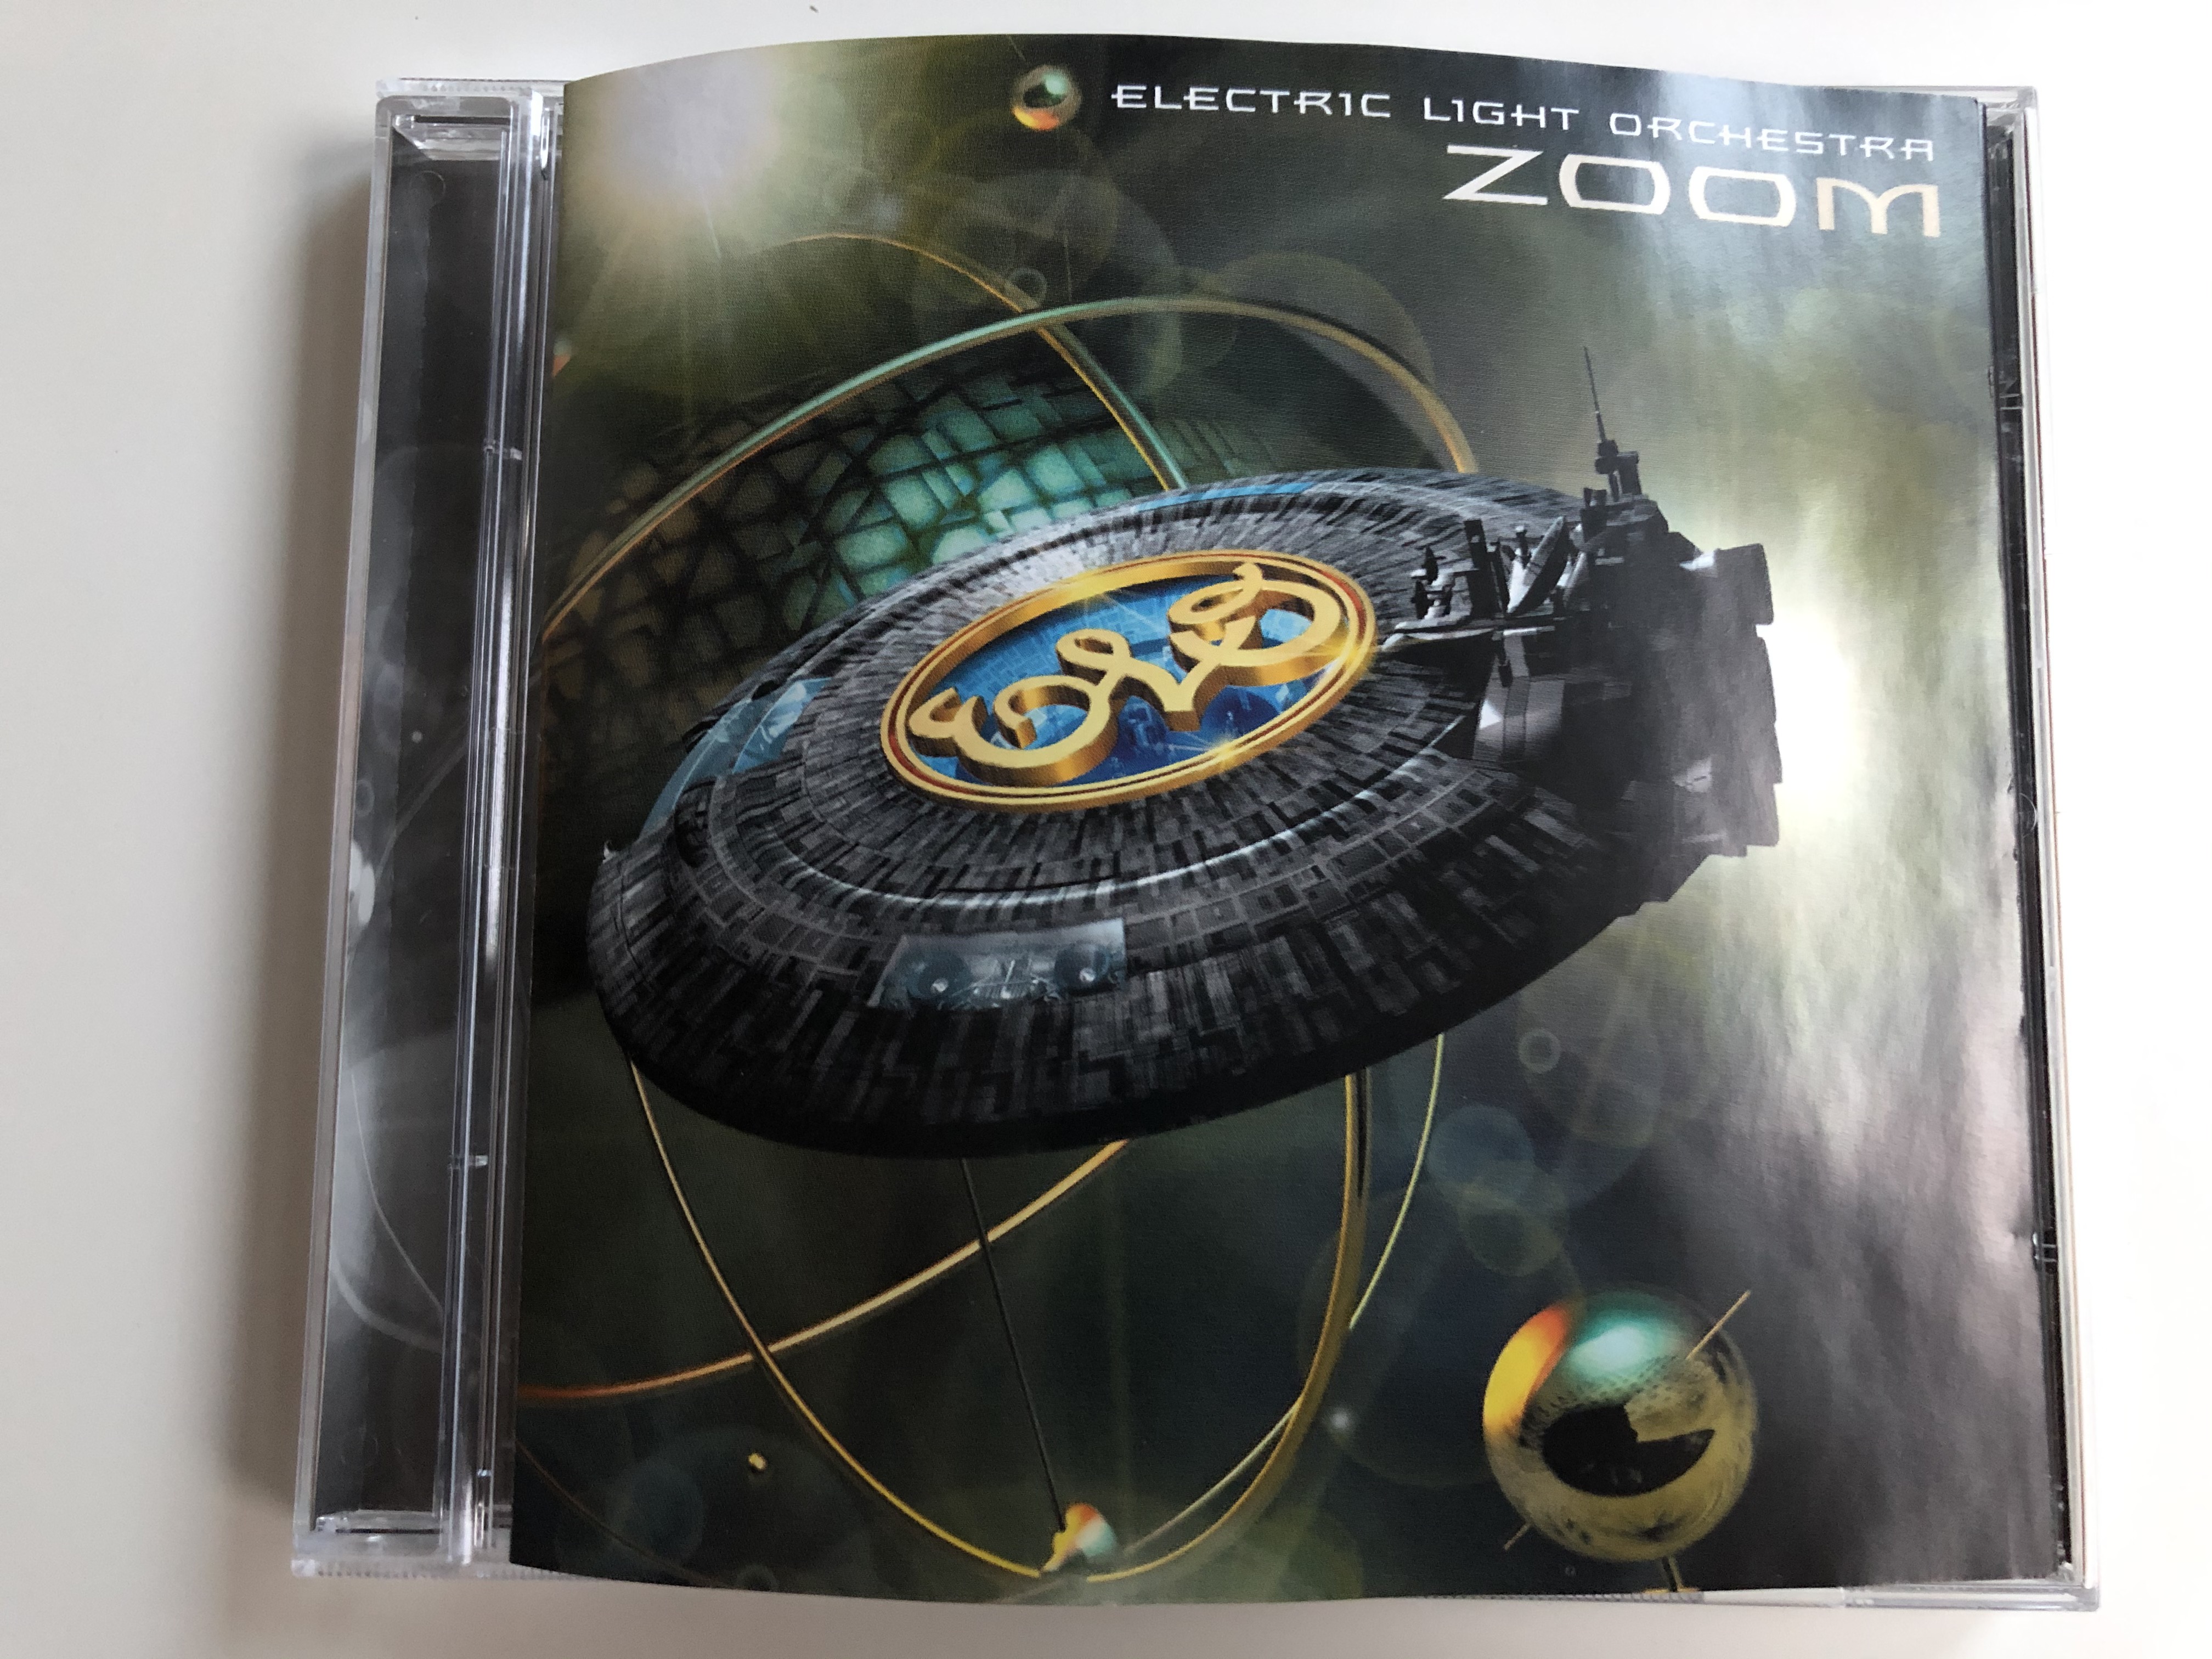 electric-light-orchestra-zoom-epic-audio-cd-2001-502500-2-1-.jpg